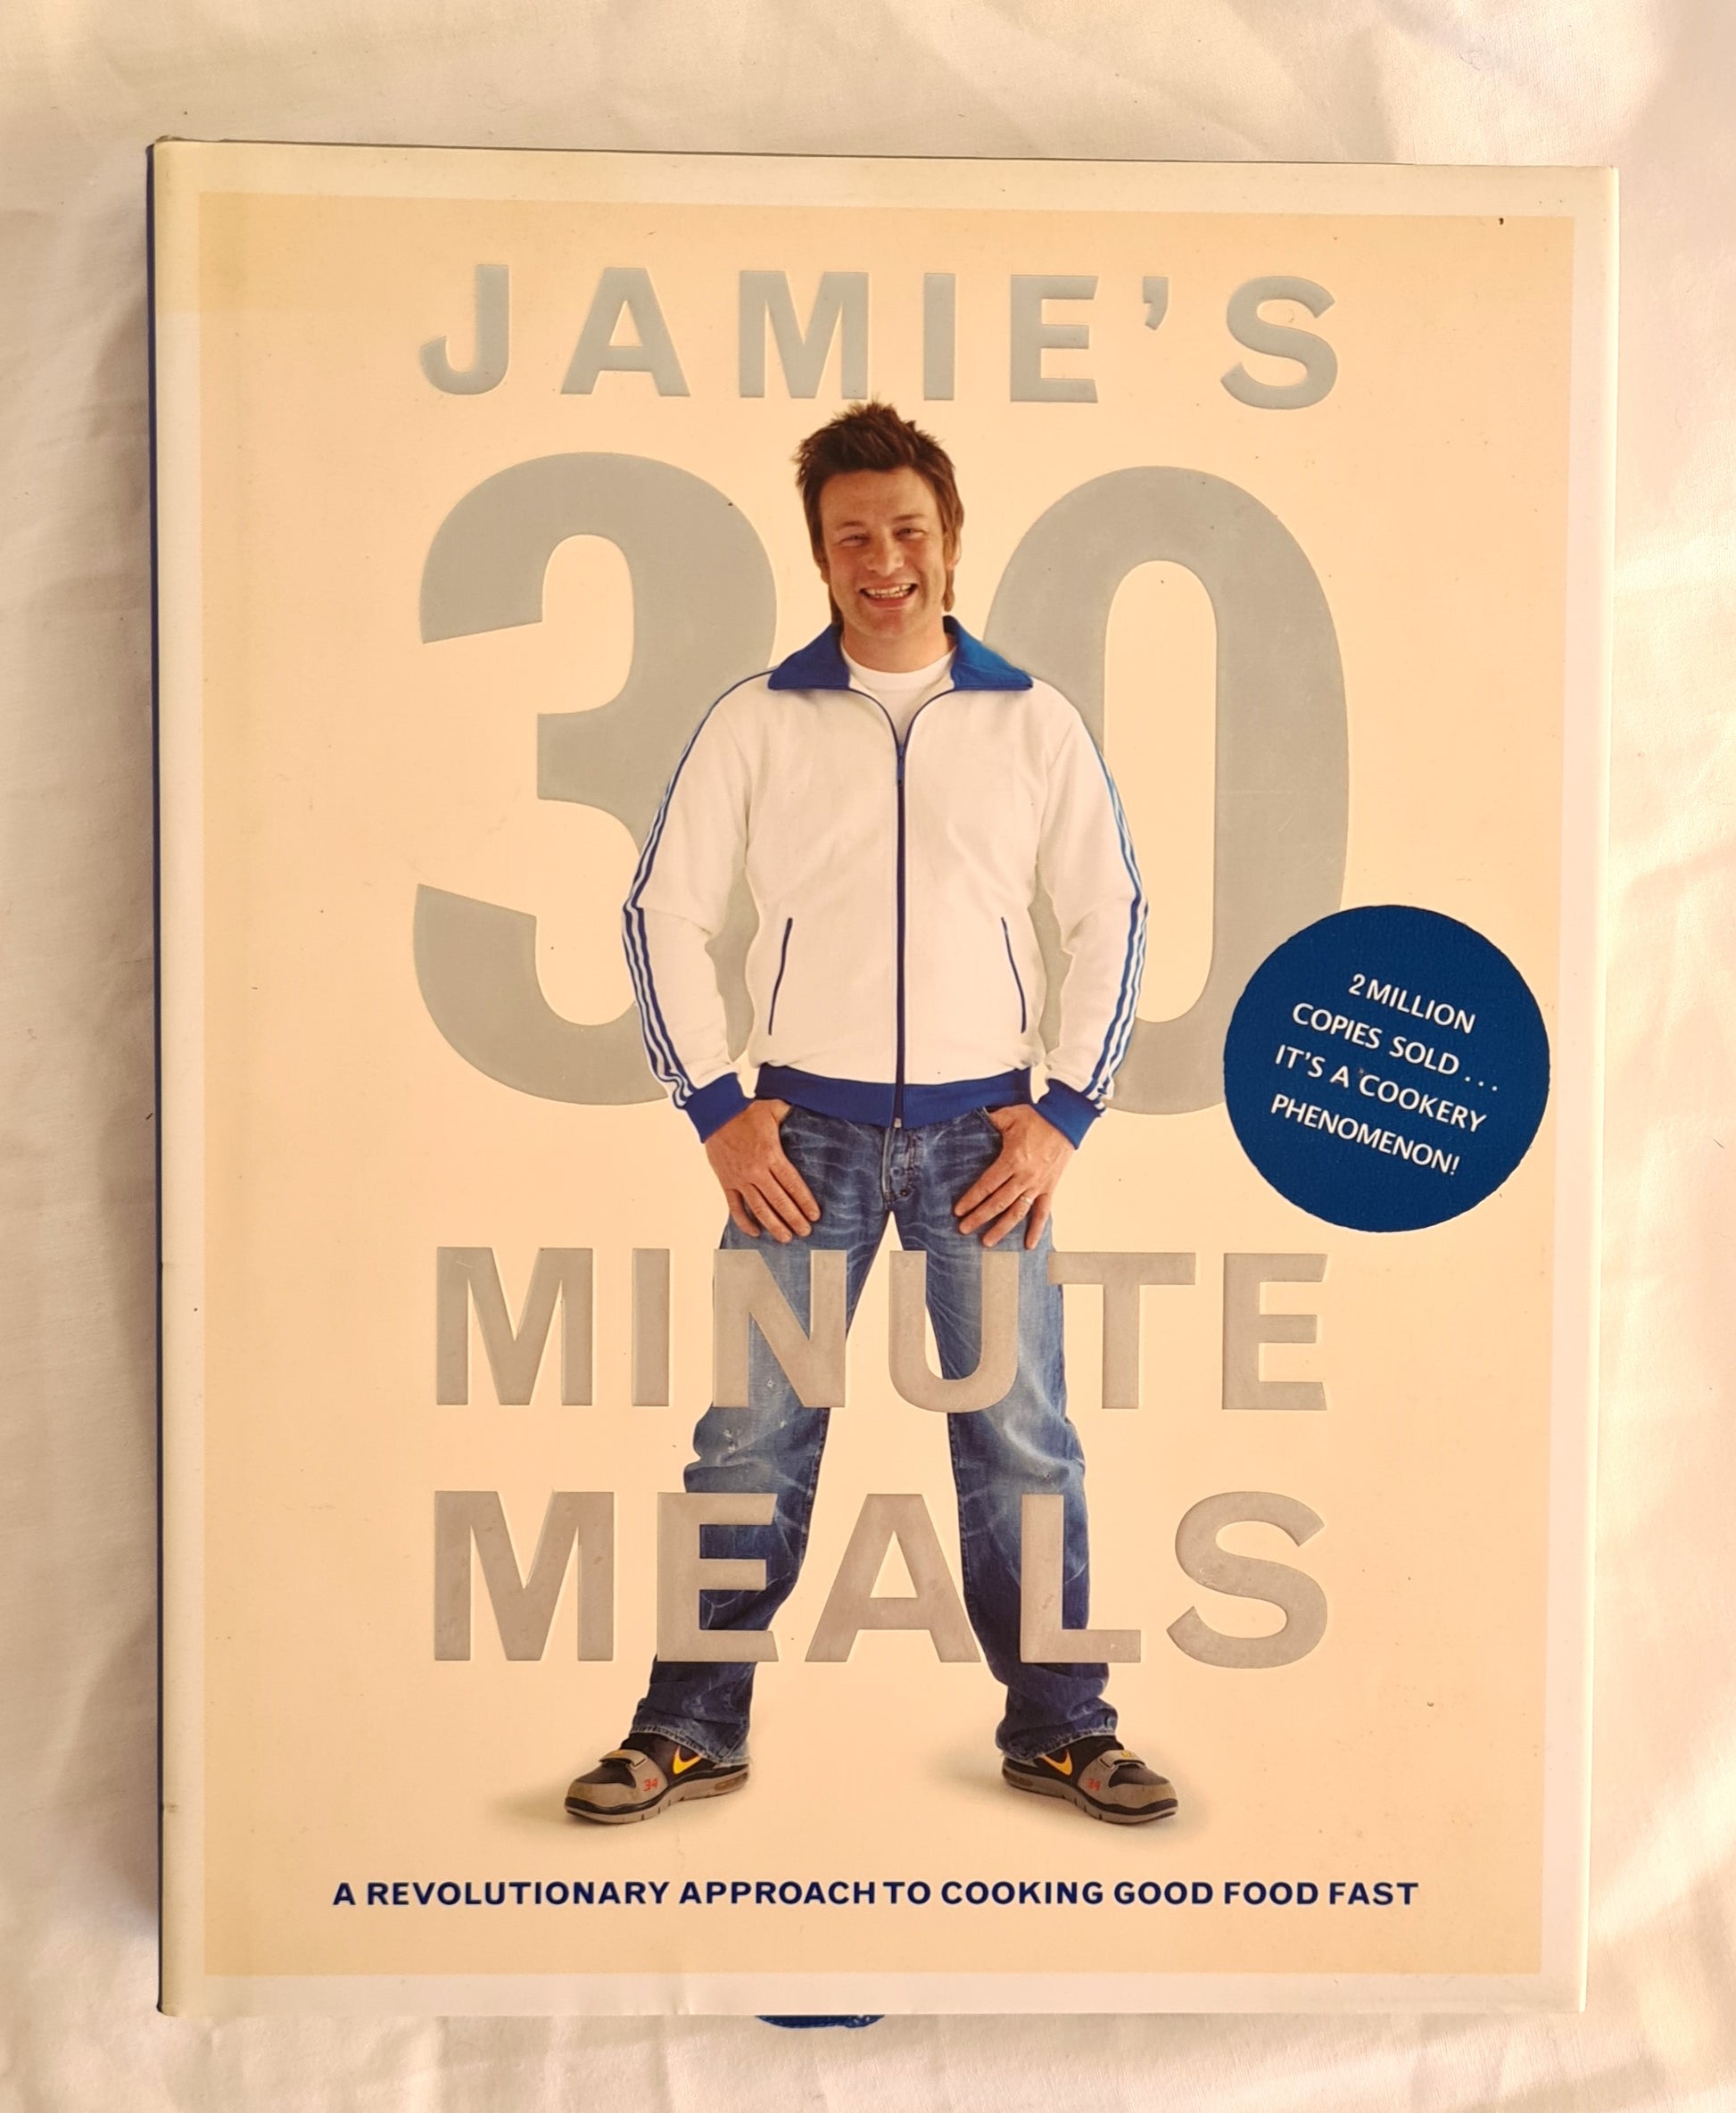 Jamie’s 30 Minute Meals  A Revolutionary Approach to Cooking Food Fast  by Jamie Oliver  Photography by David Loftus